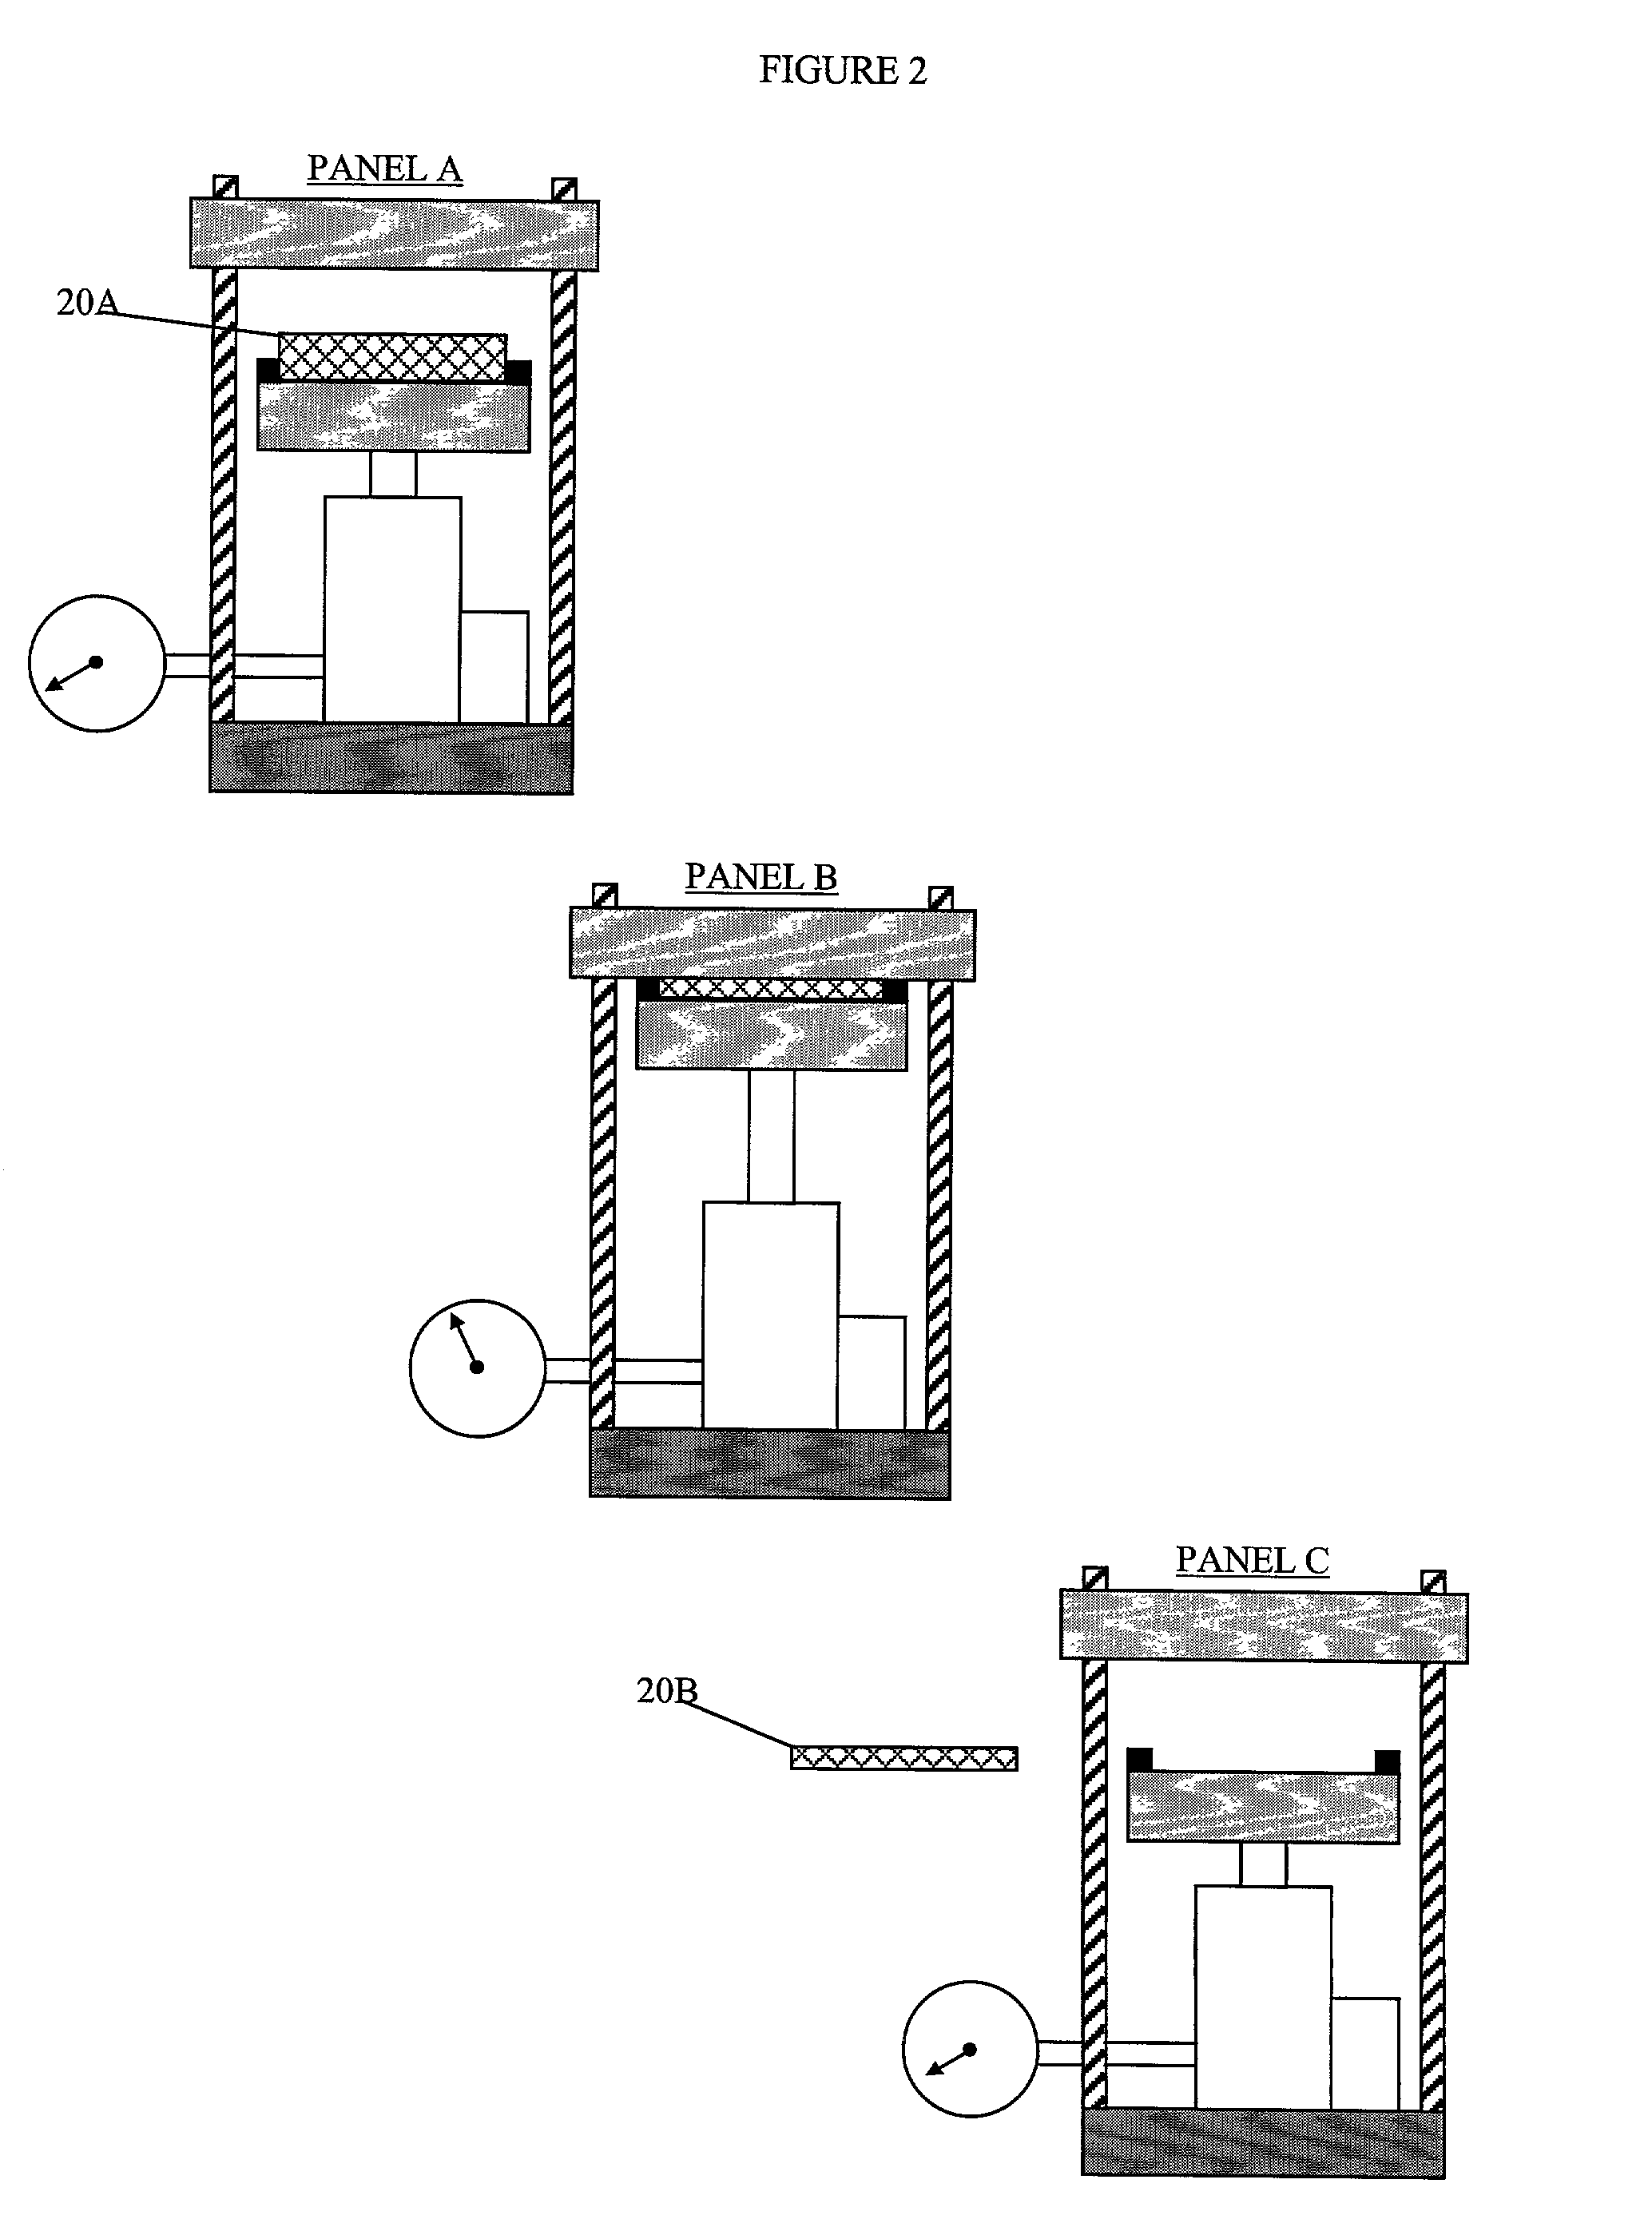 Method for controlling thermohysteresis during thermoforming of three-dimensional fibrous compound constructs and the product thereof